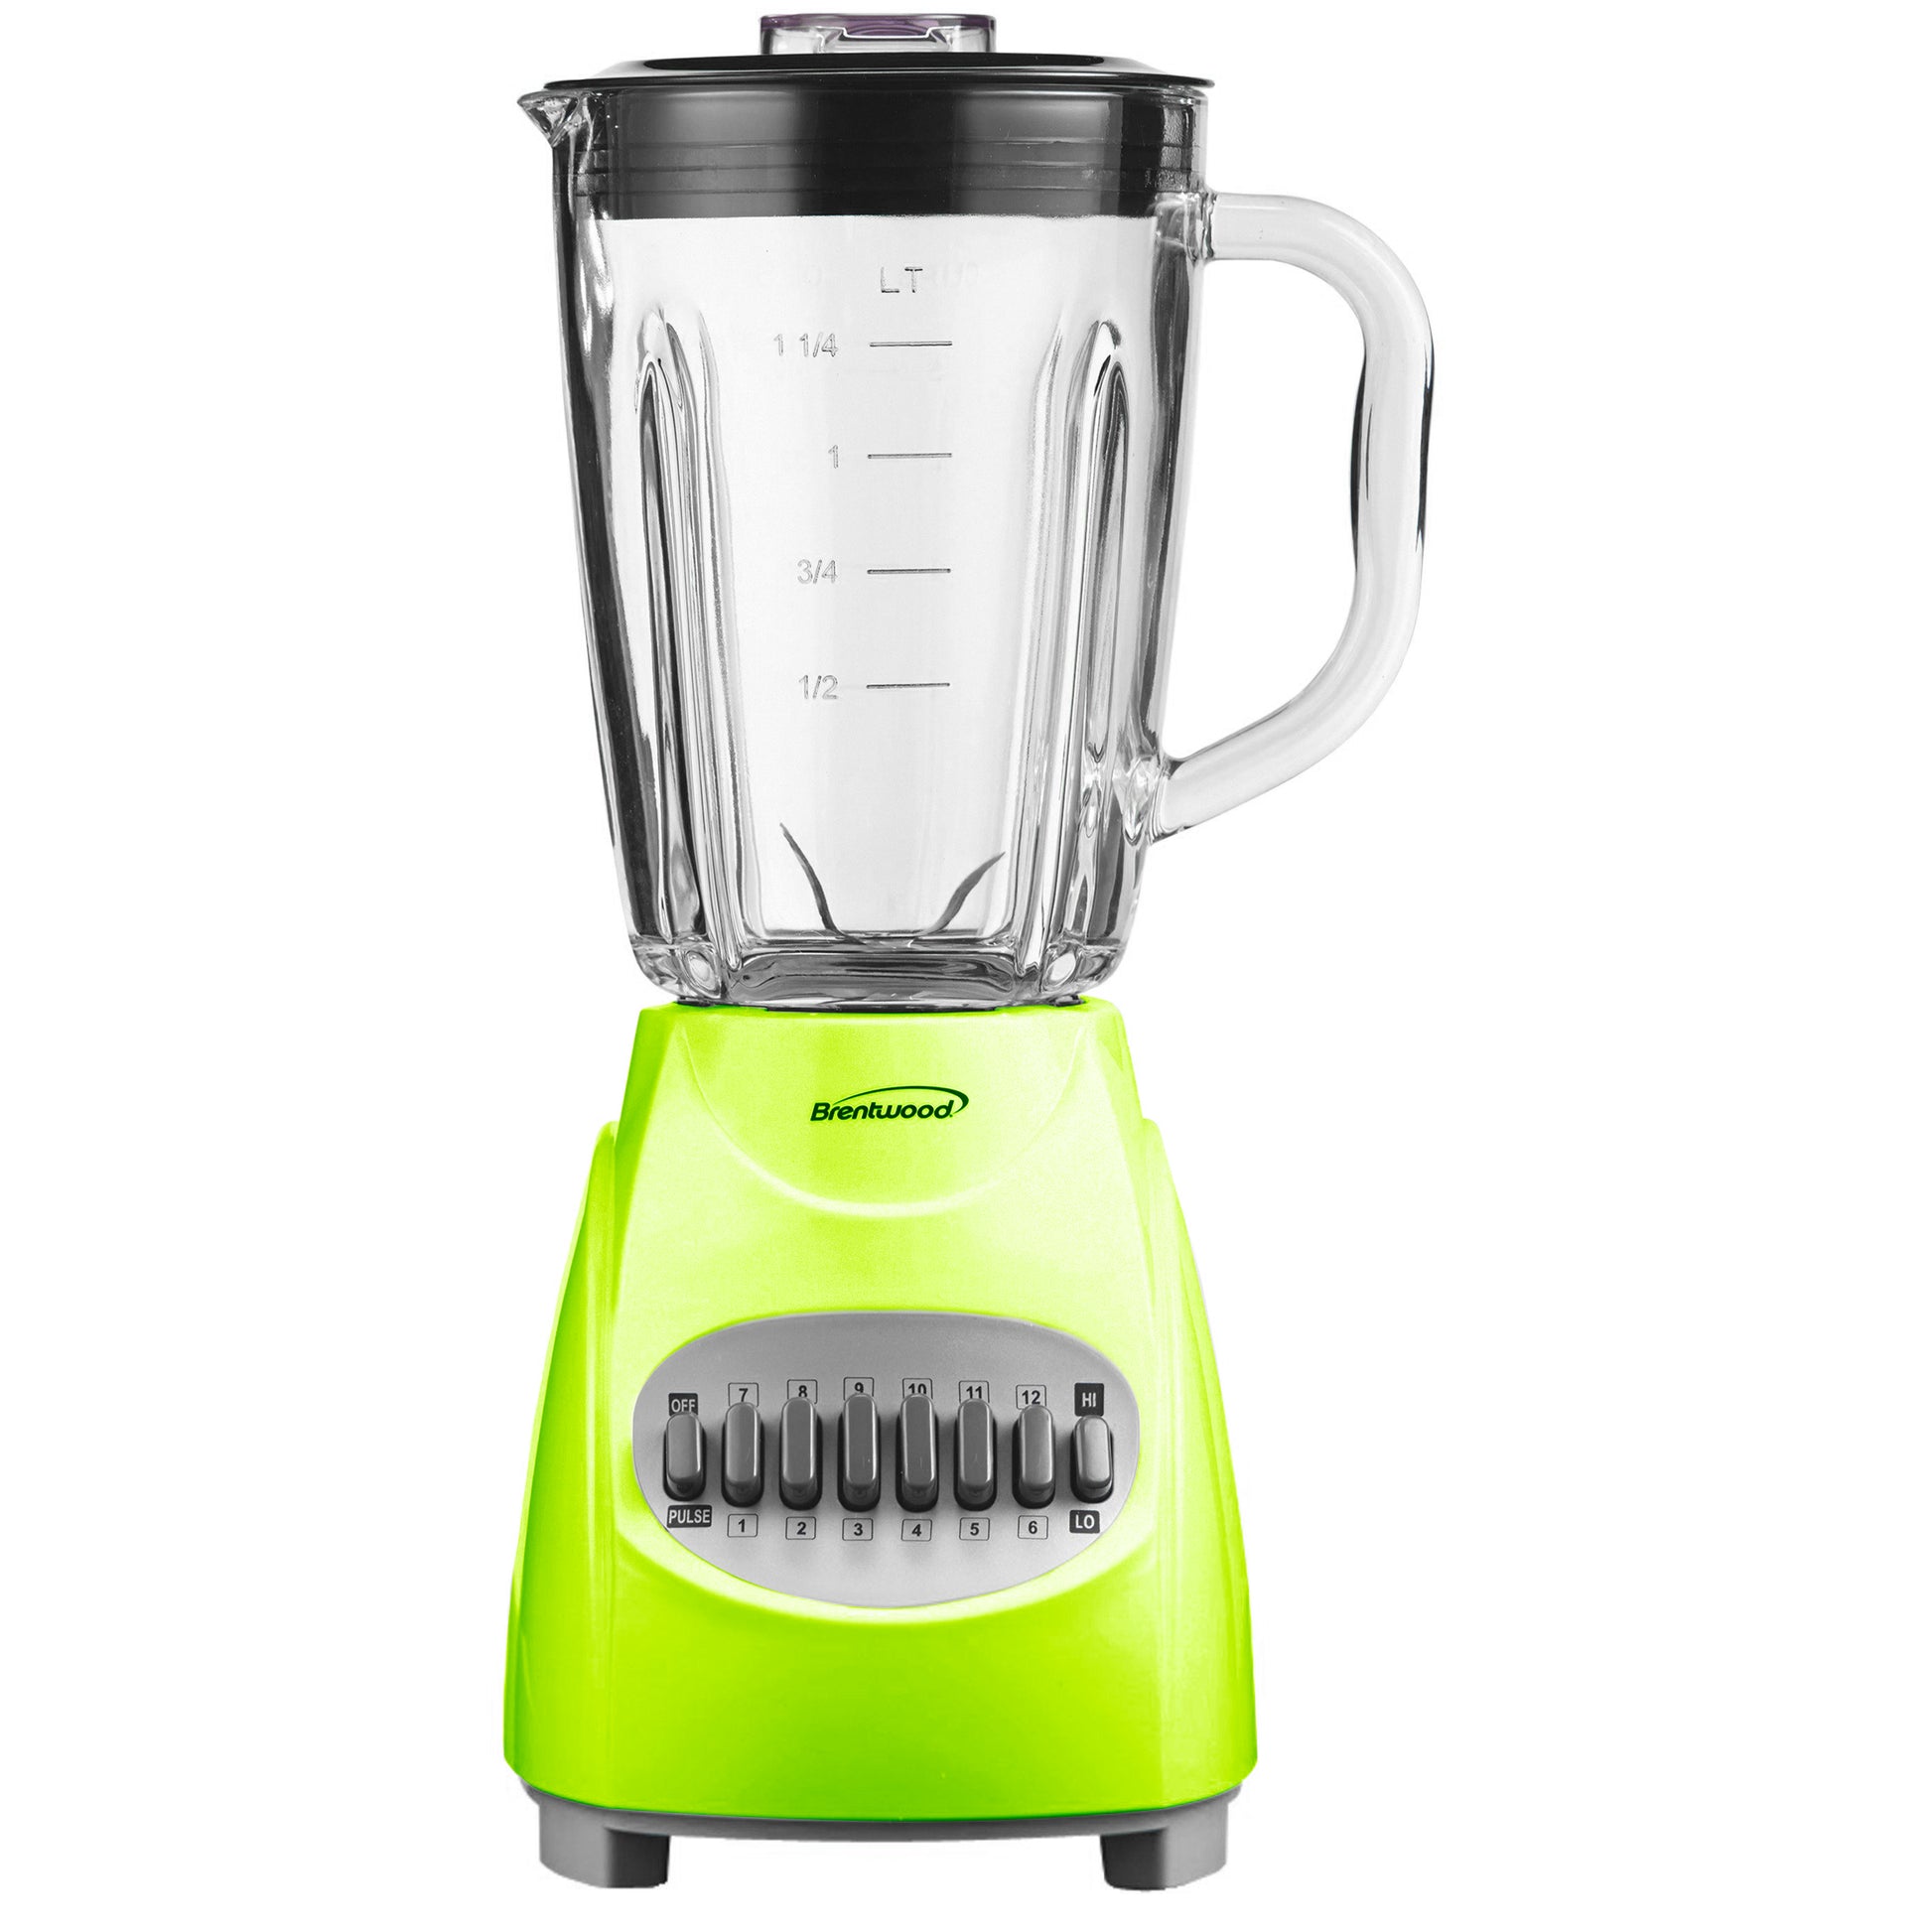 BRENTWOOD Brentwood 12-Speed Blender with Plastic Jar in Green